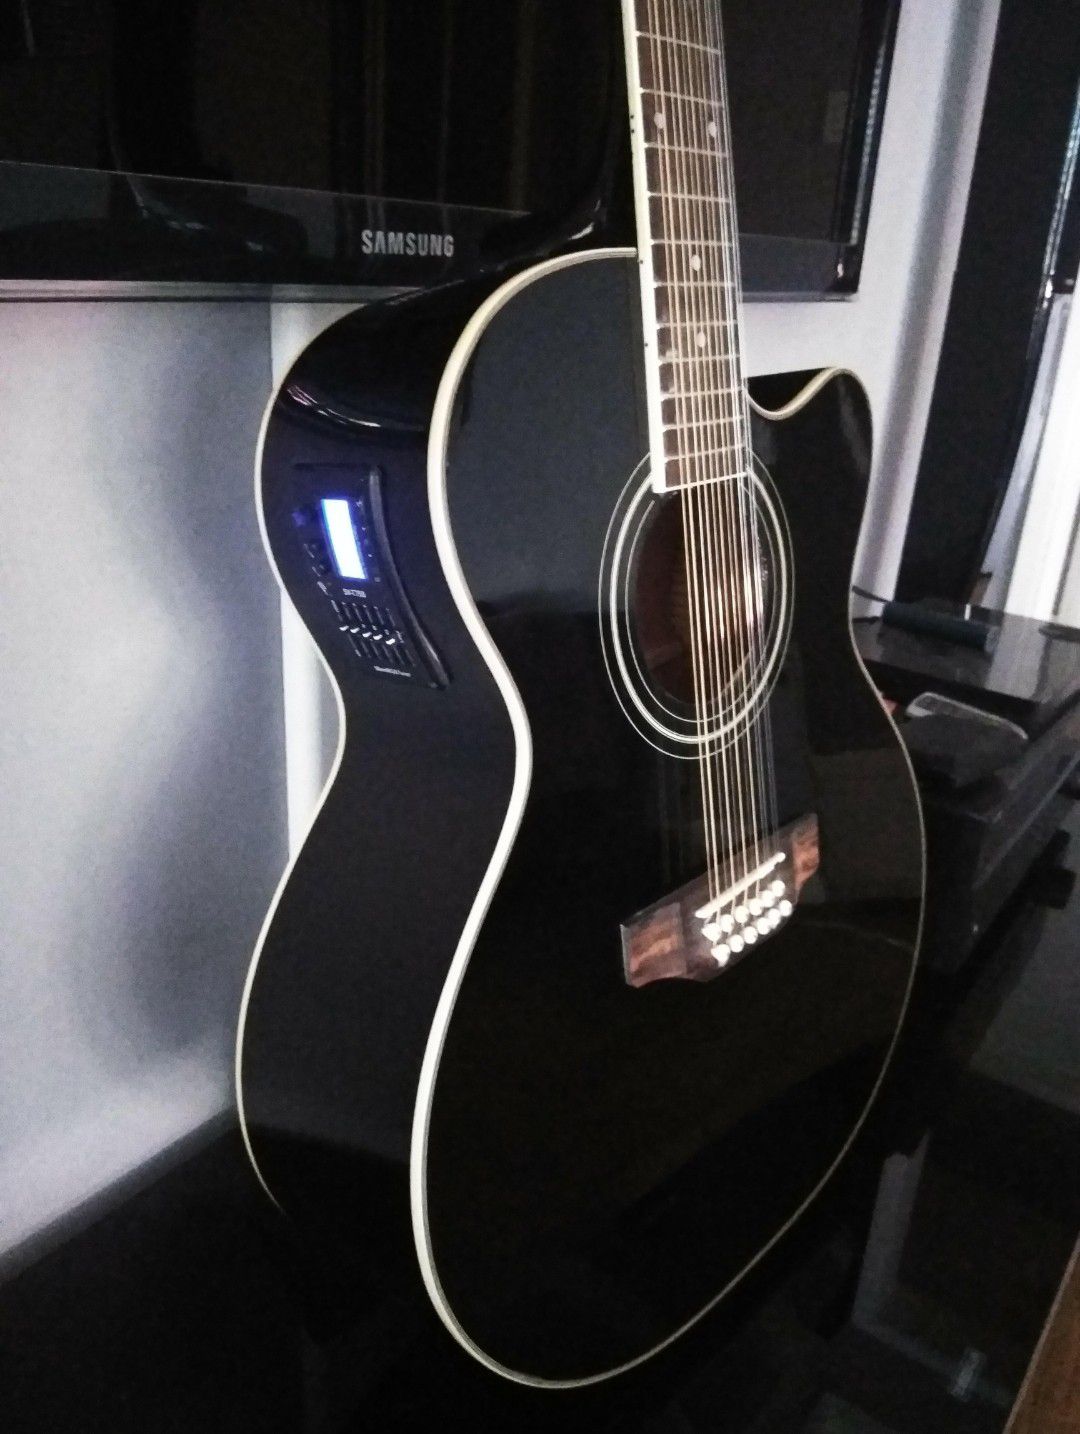 New Black 12 String Acoustic Electric Guitar Combo with Gig Bag and Accessories 🎸 Guitarra 12 Cuerdas Electrica Acústica Combo